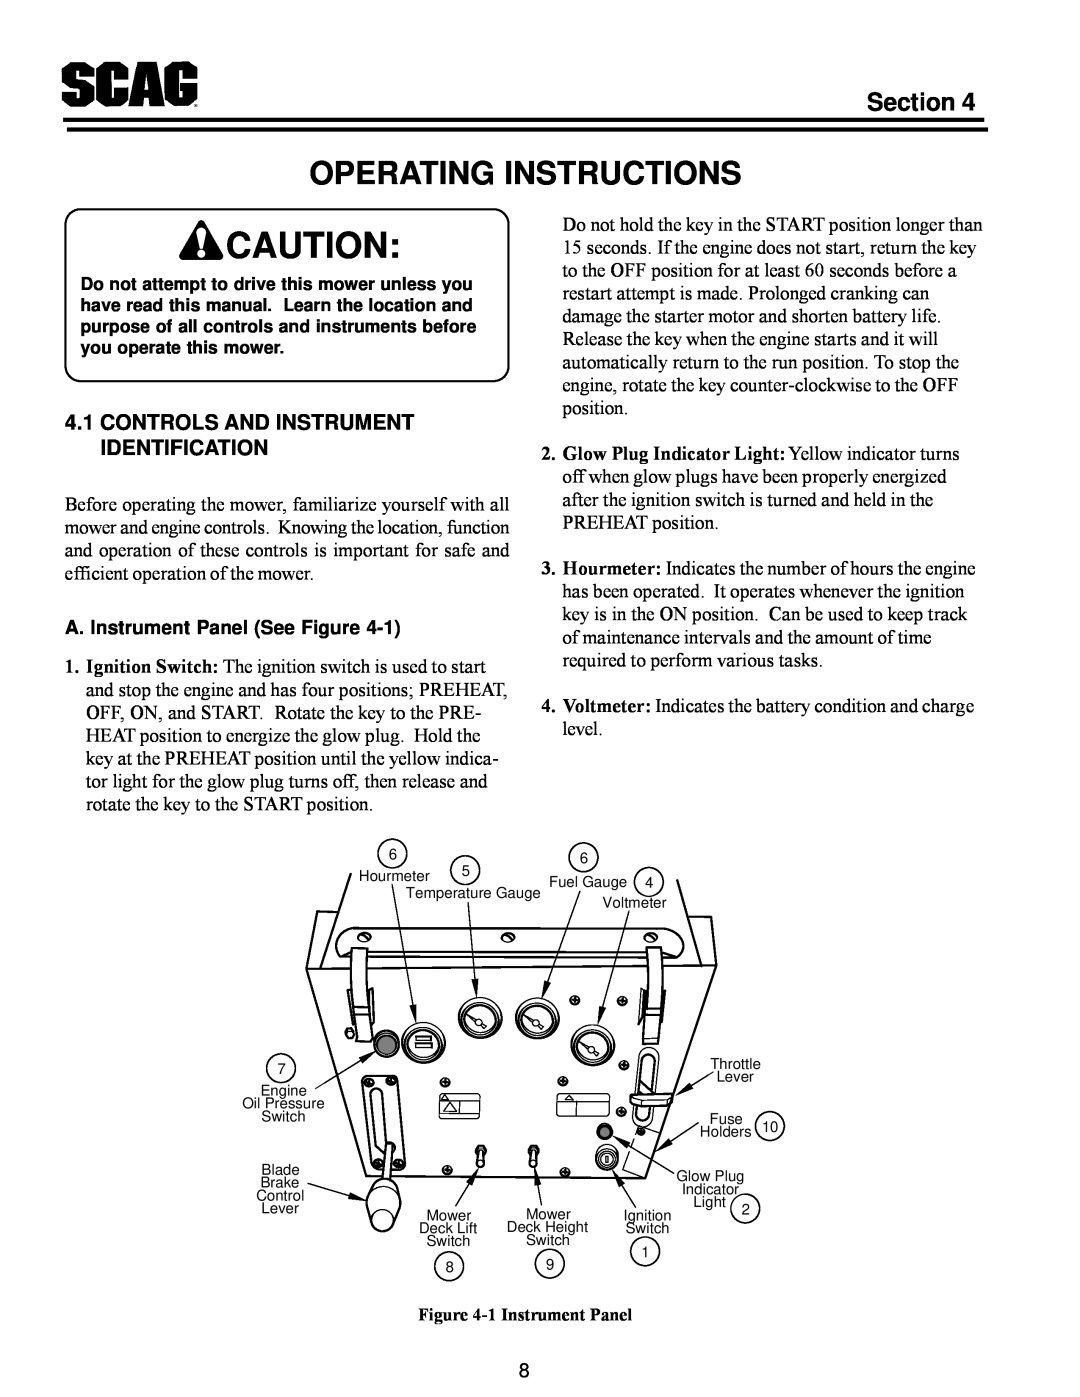 Scag Power Equipment MAG manual Operating Instructions, Controls And Instrument Identification, Section 